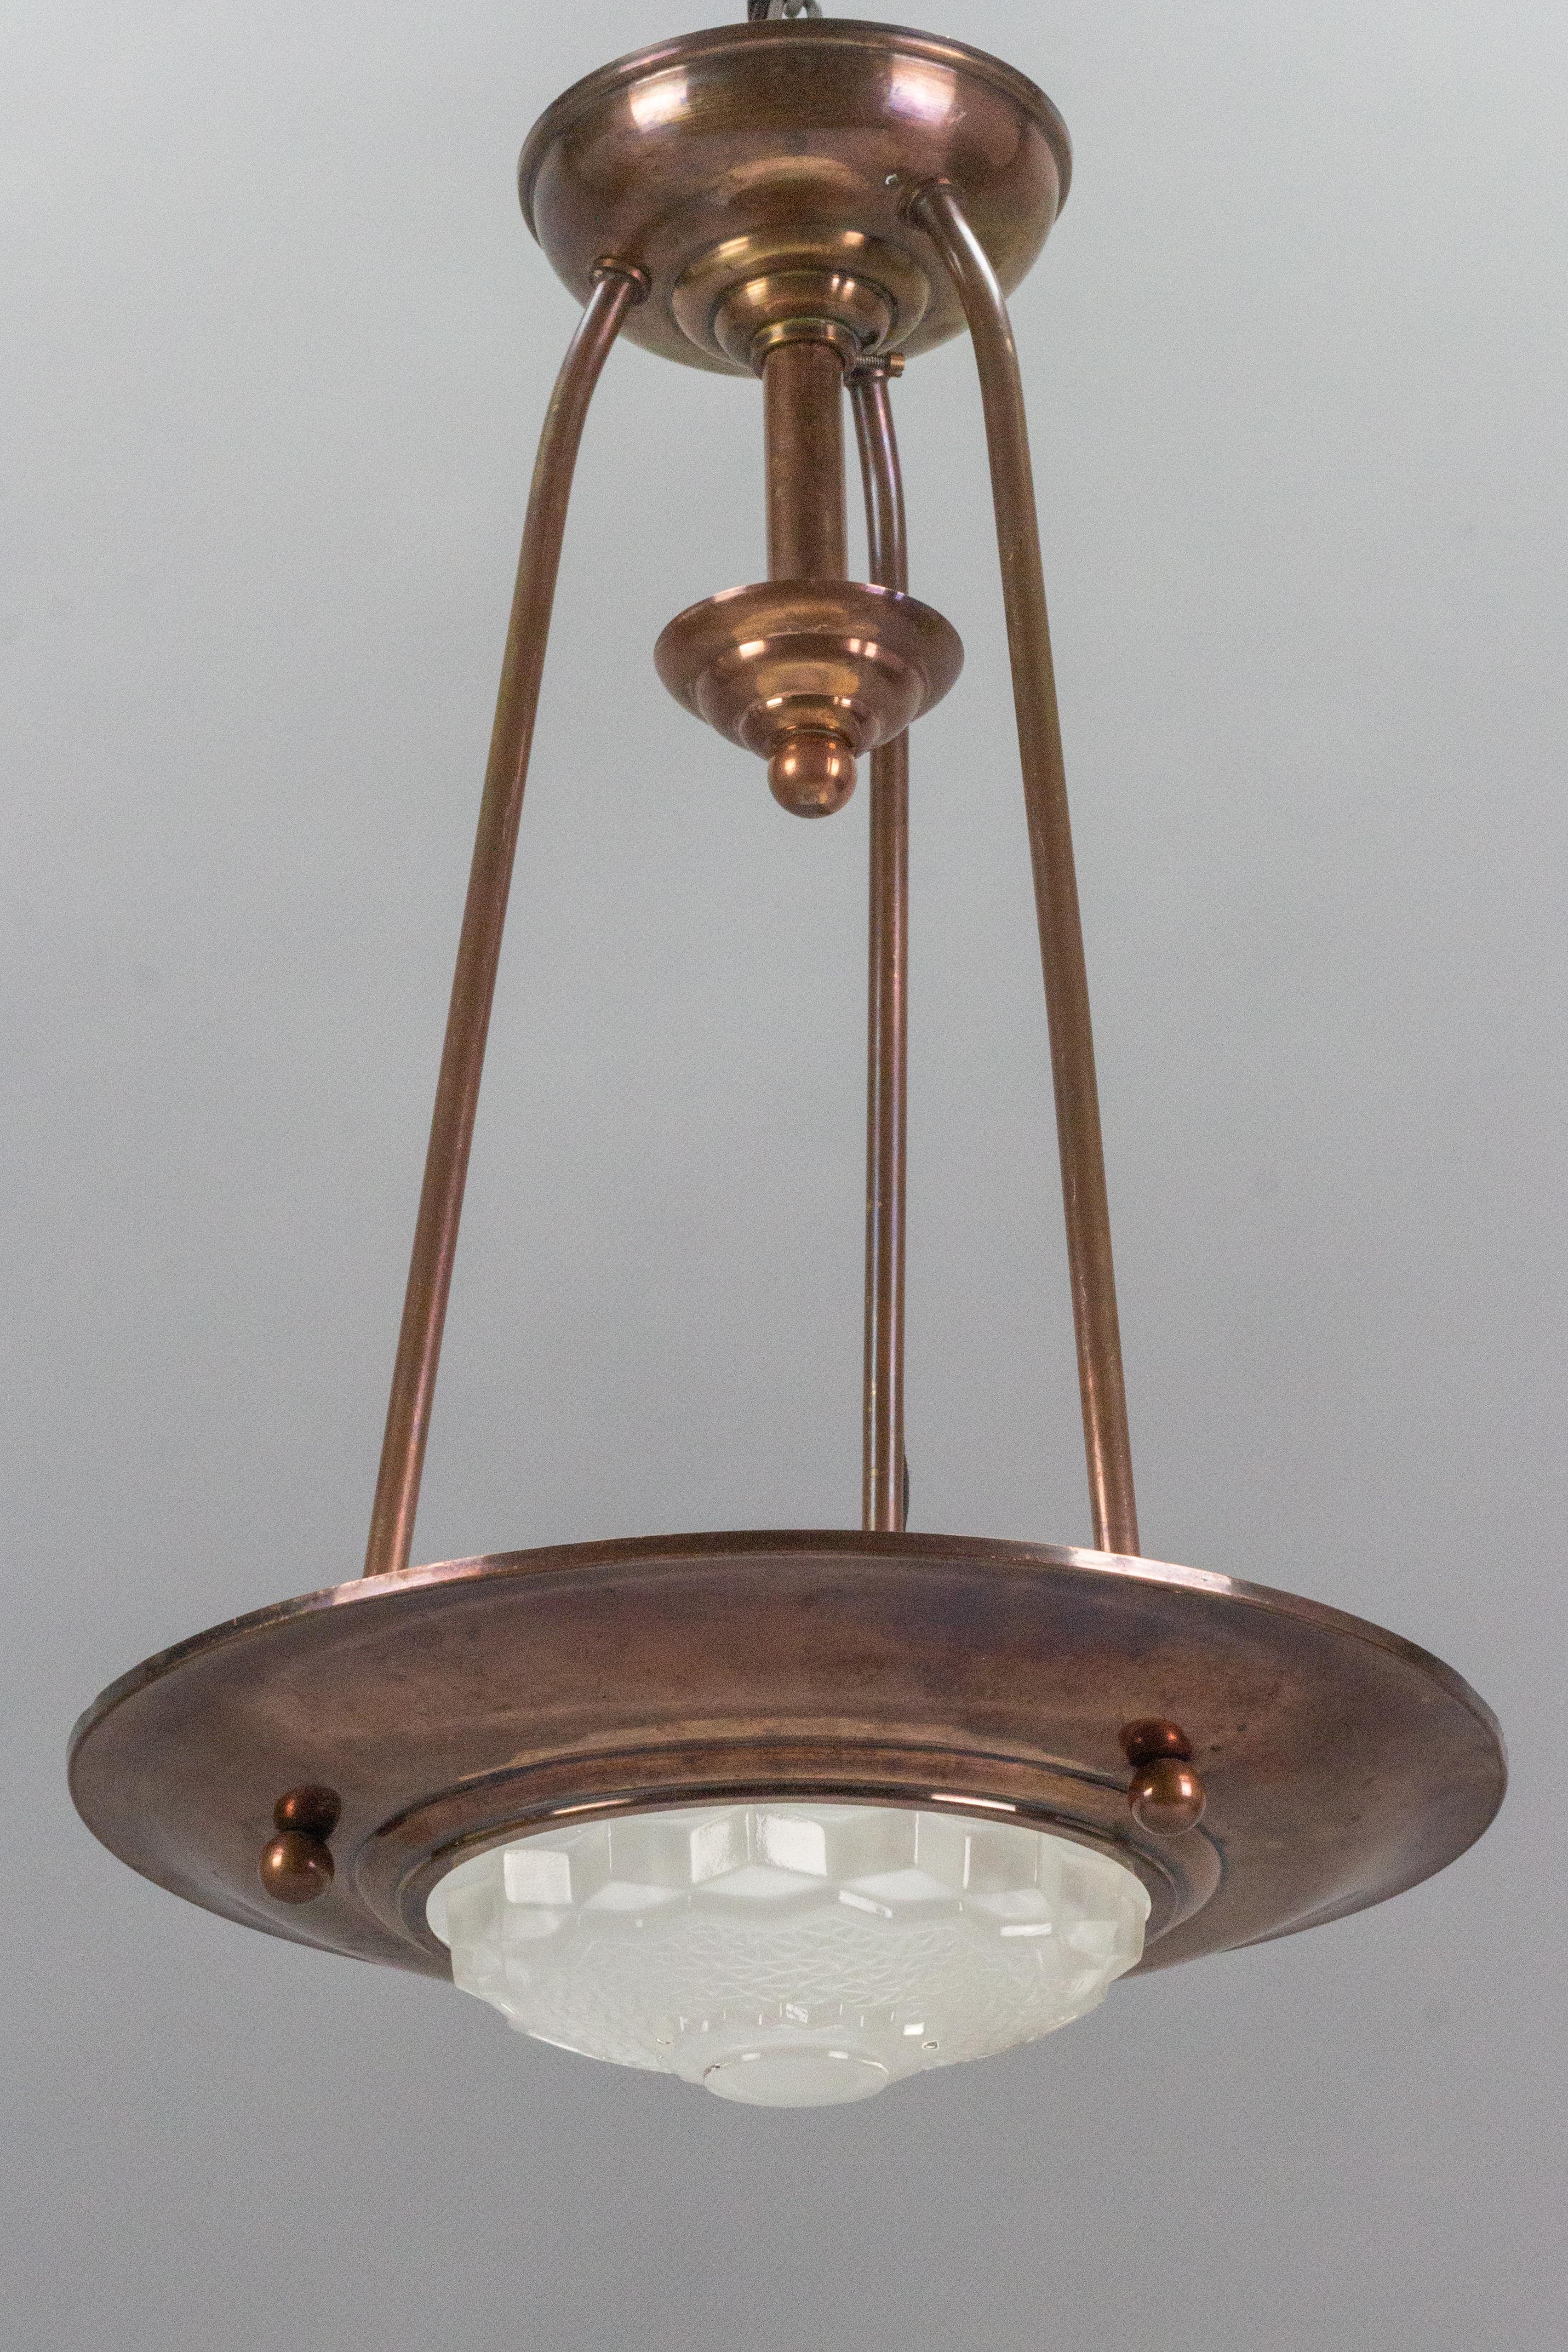 Adorable and compact Art Deco copper and frosted glass pendant light in the style of Ezan, France, 1930s.
One socket for an E14-size light bulb.
Dimensions: height: circa 40 cm / 15.74 in; diameter: 26 cm / 10.23 in.
The light fixture is in complete